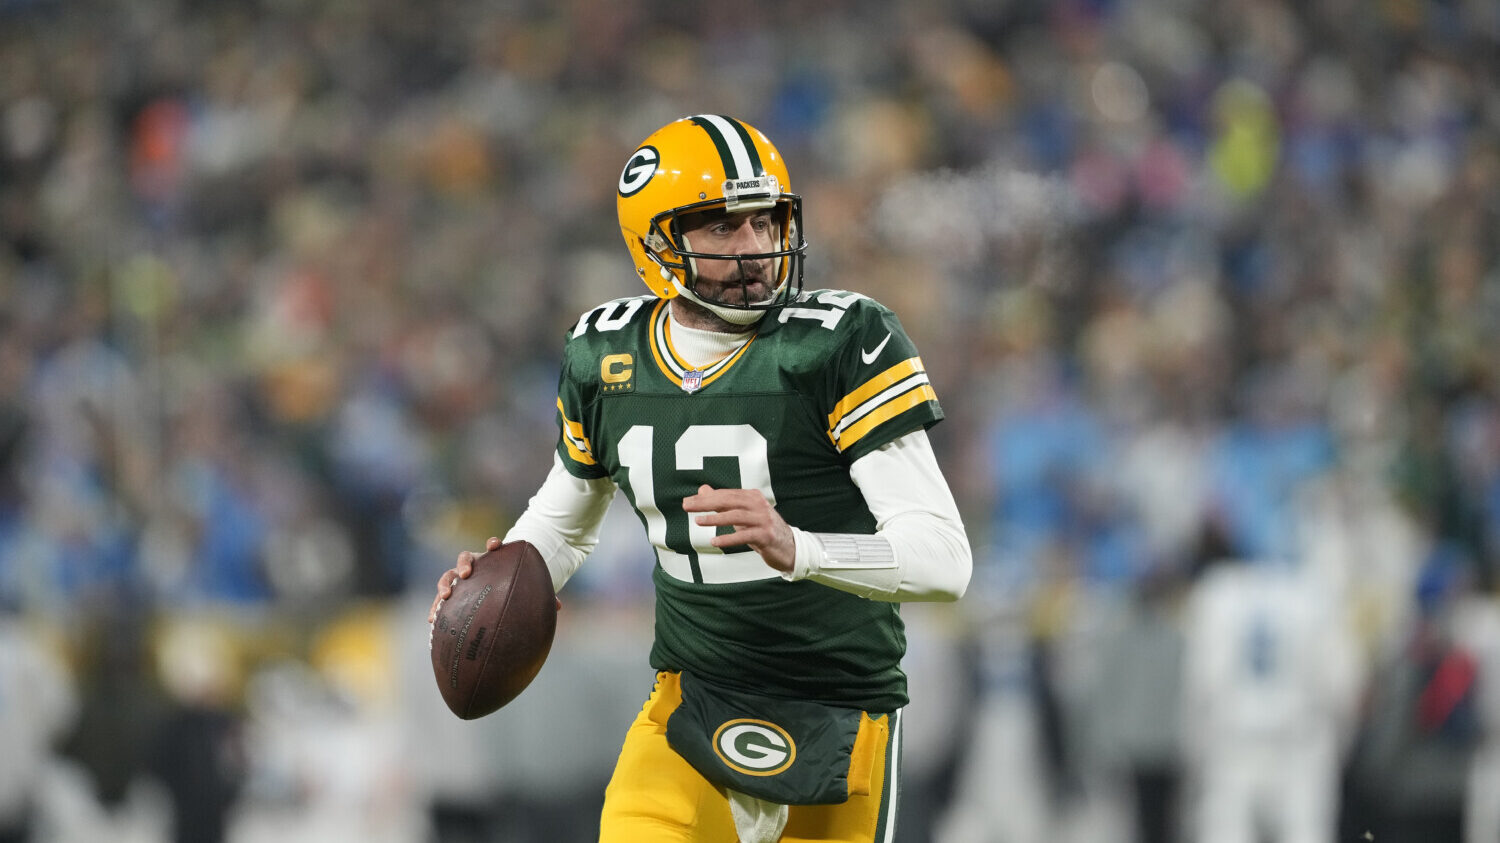 Aaron Rodgers to the Jets: Trade Details & Salary Cap Breakdown